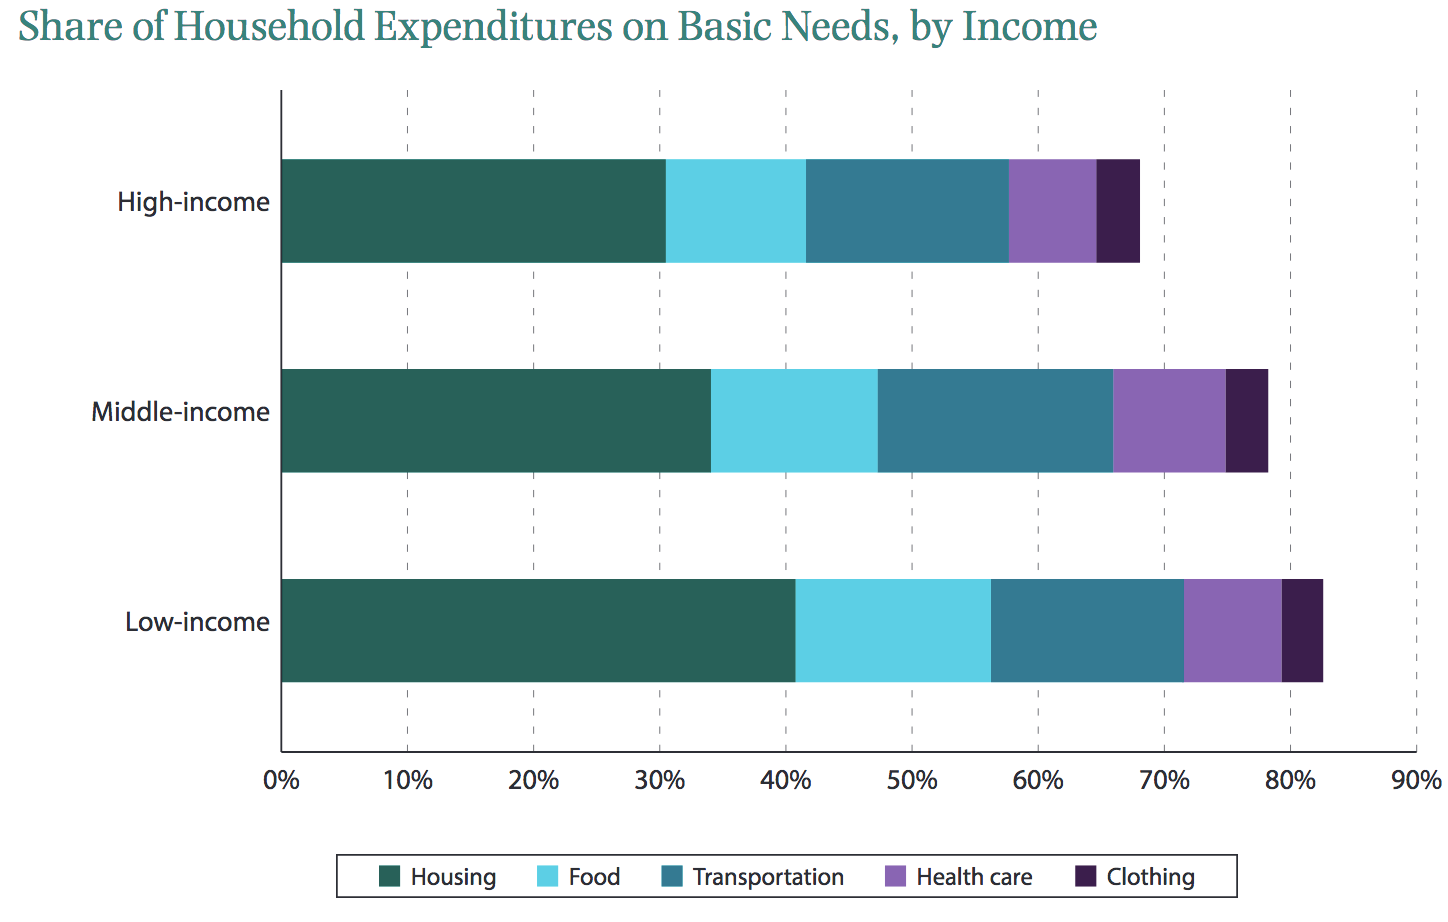 Basic Needs As % Expenses By Income (When The Majority Hurts)